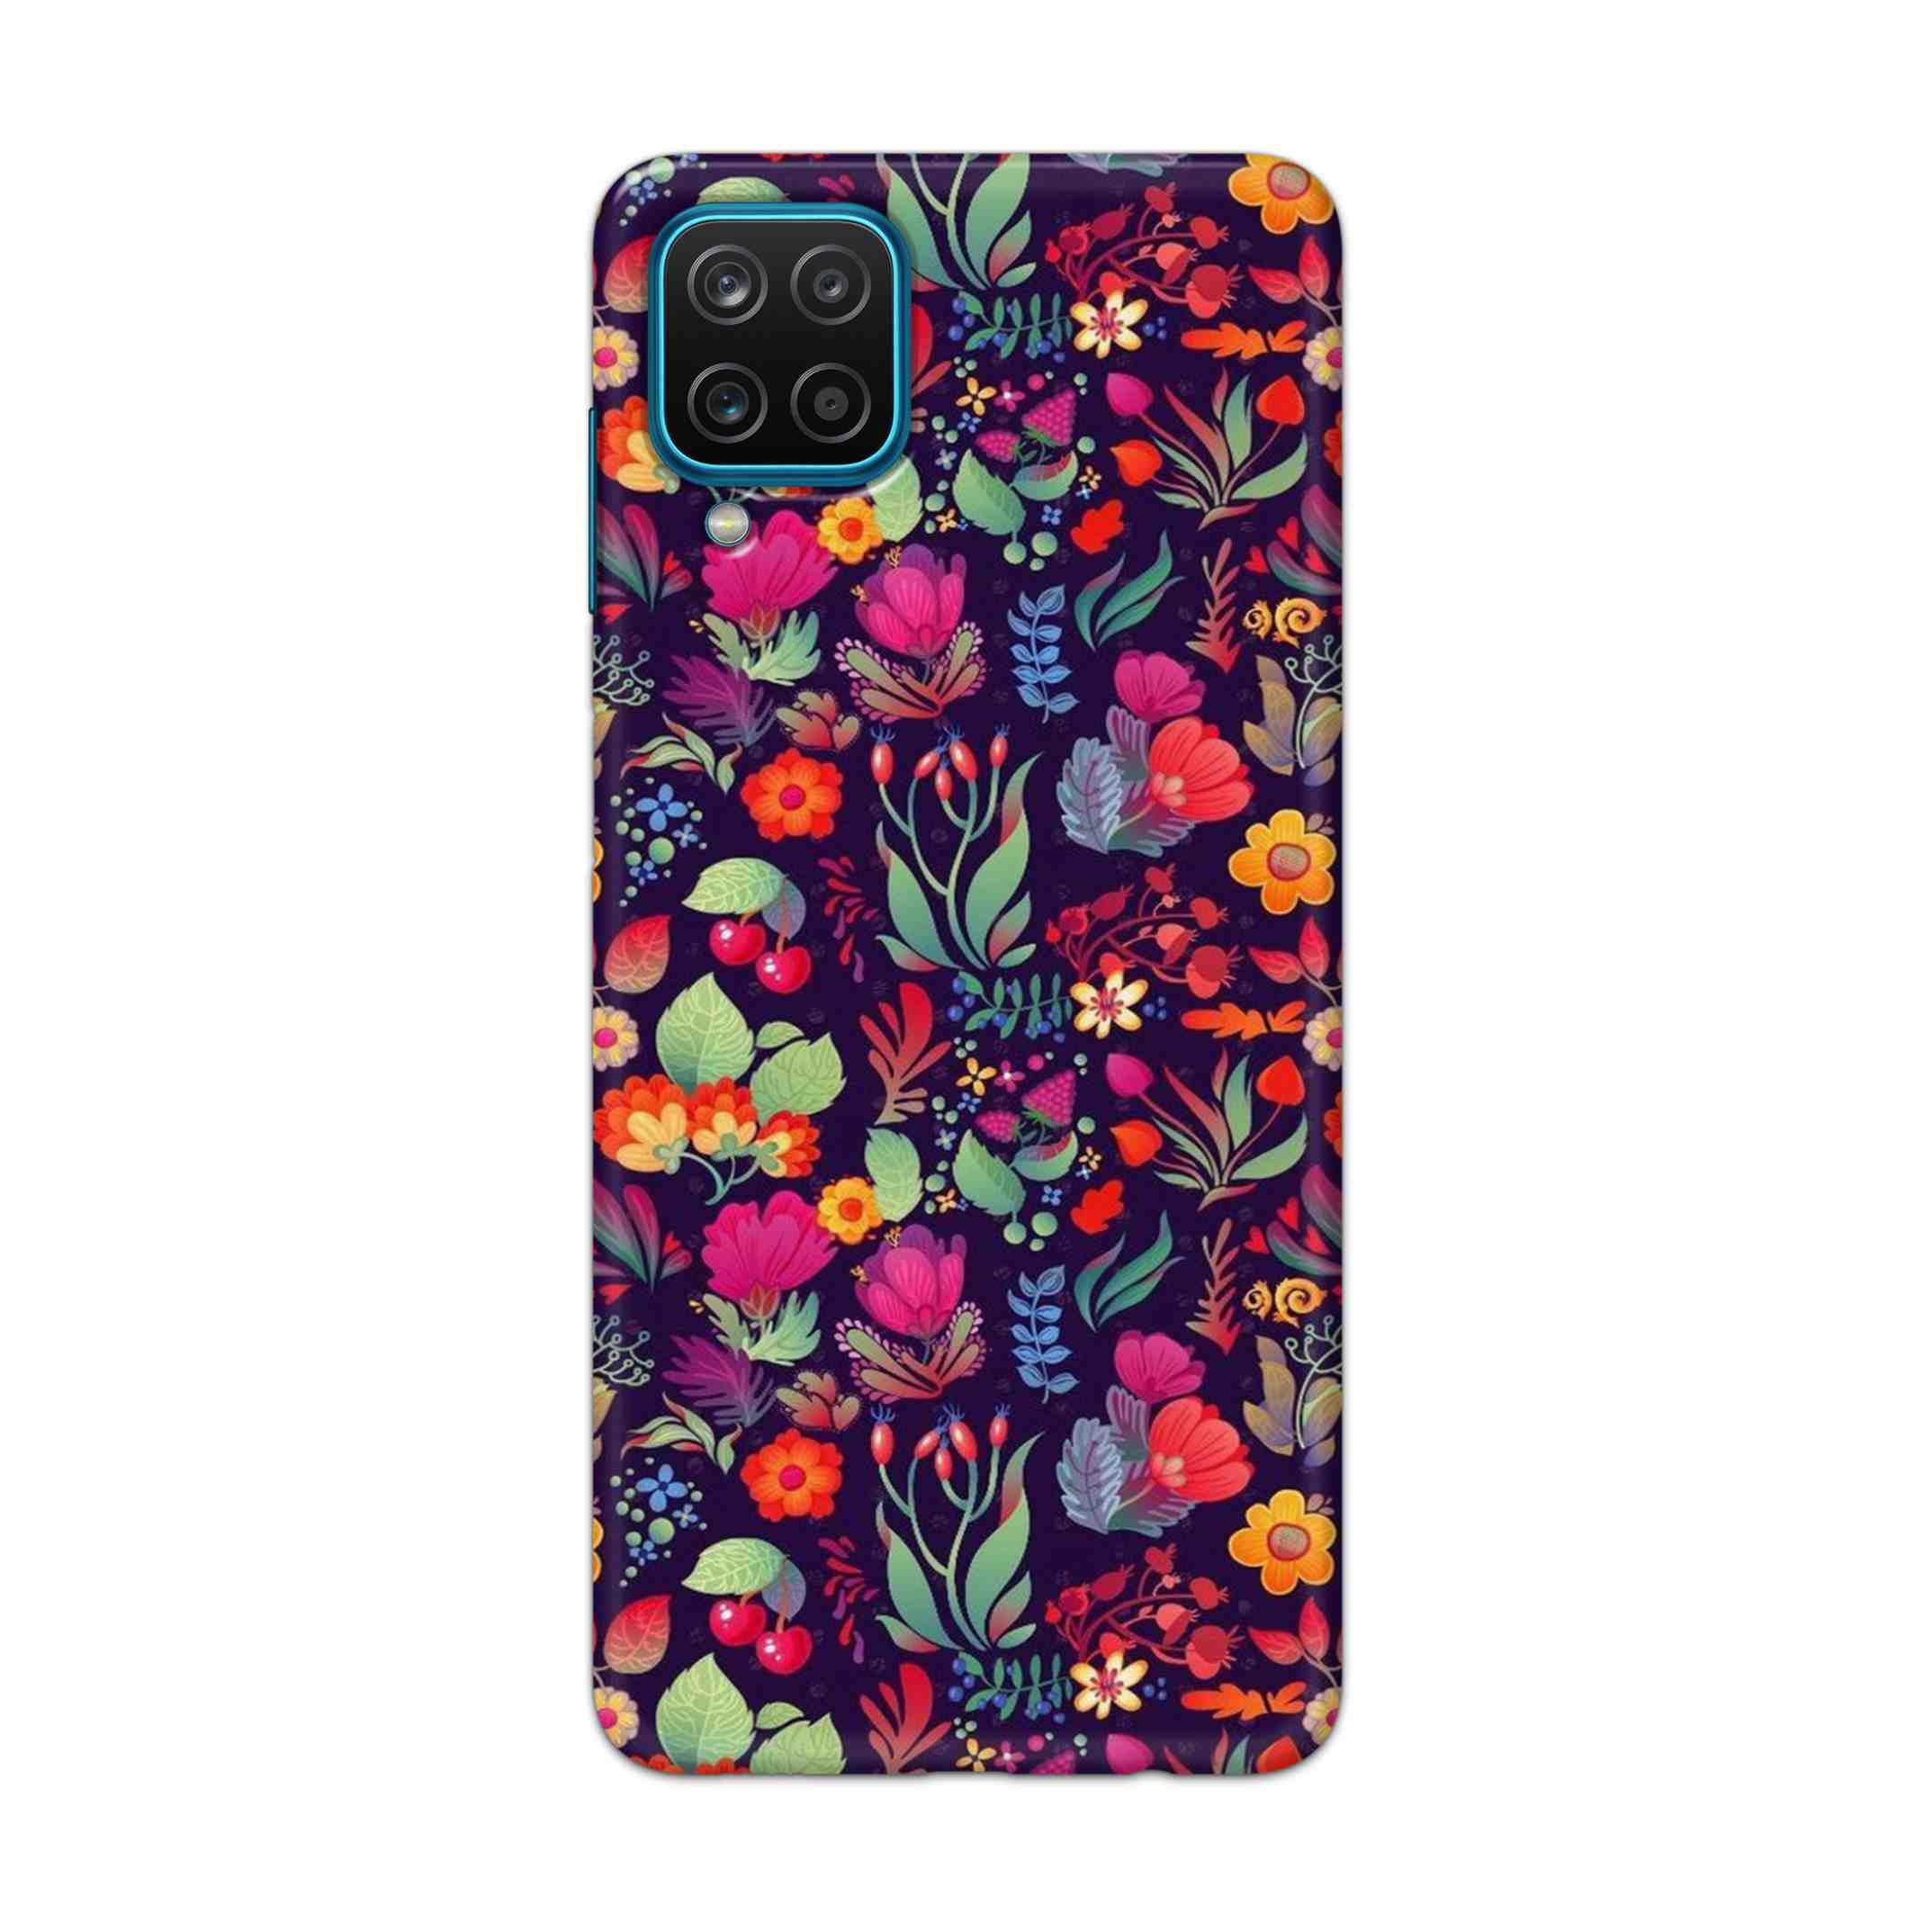 Buy Fruits Flower Hard Back Mobile Phone Case Cover For Samsung Galaxy A12 Online